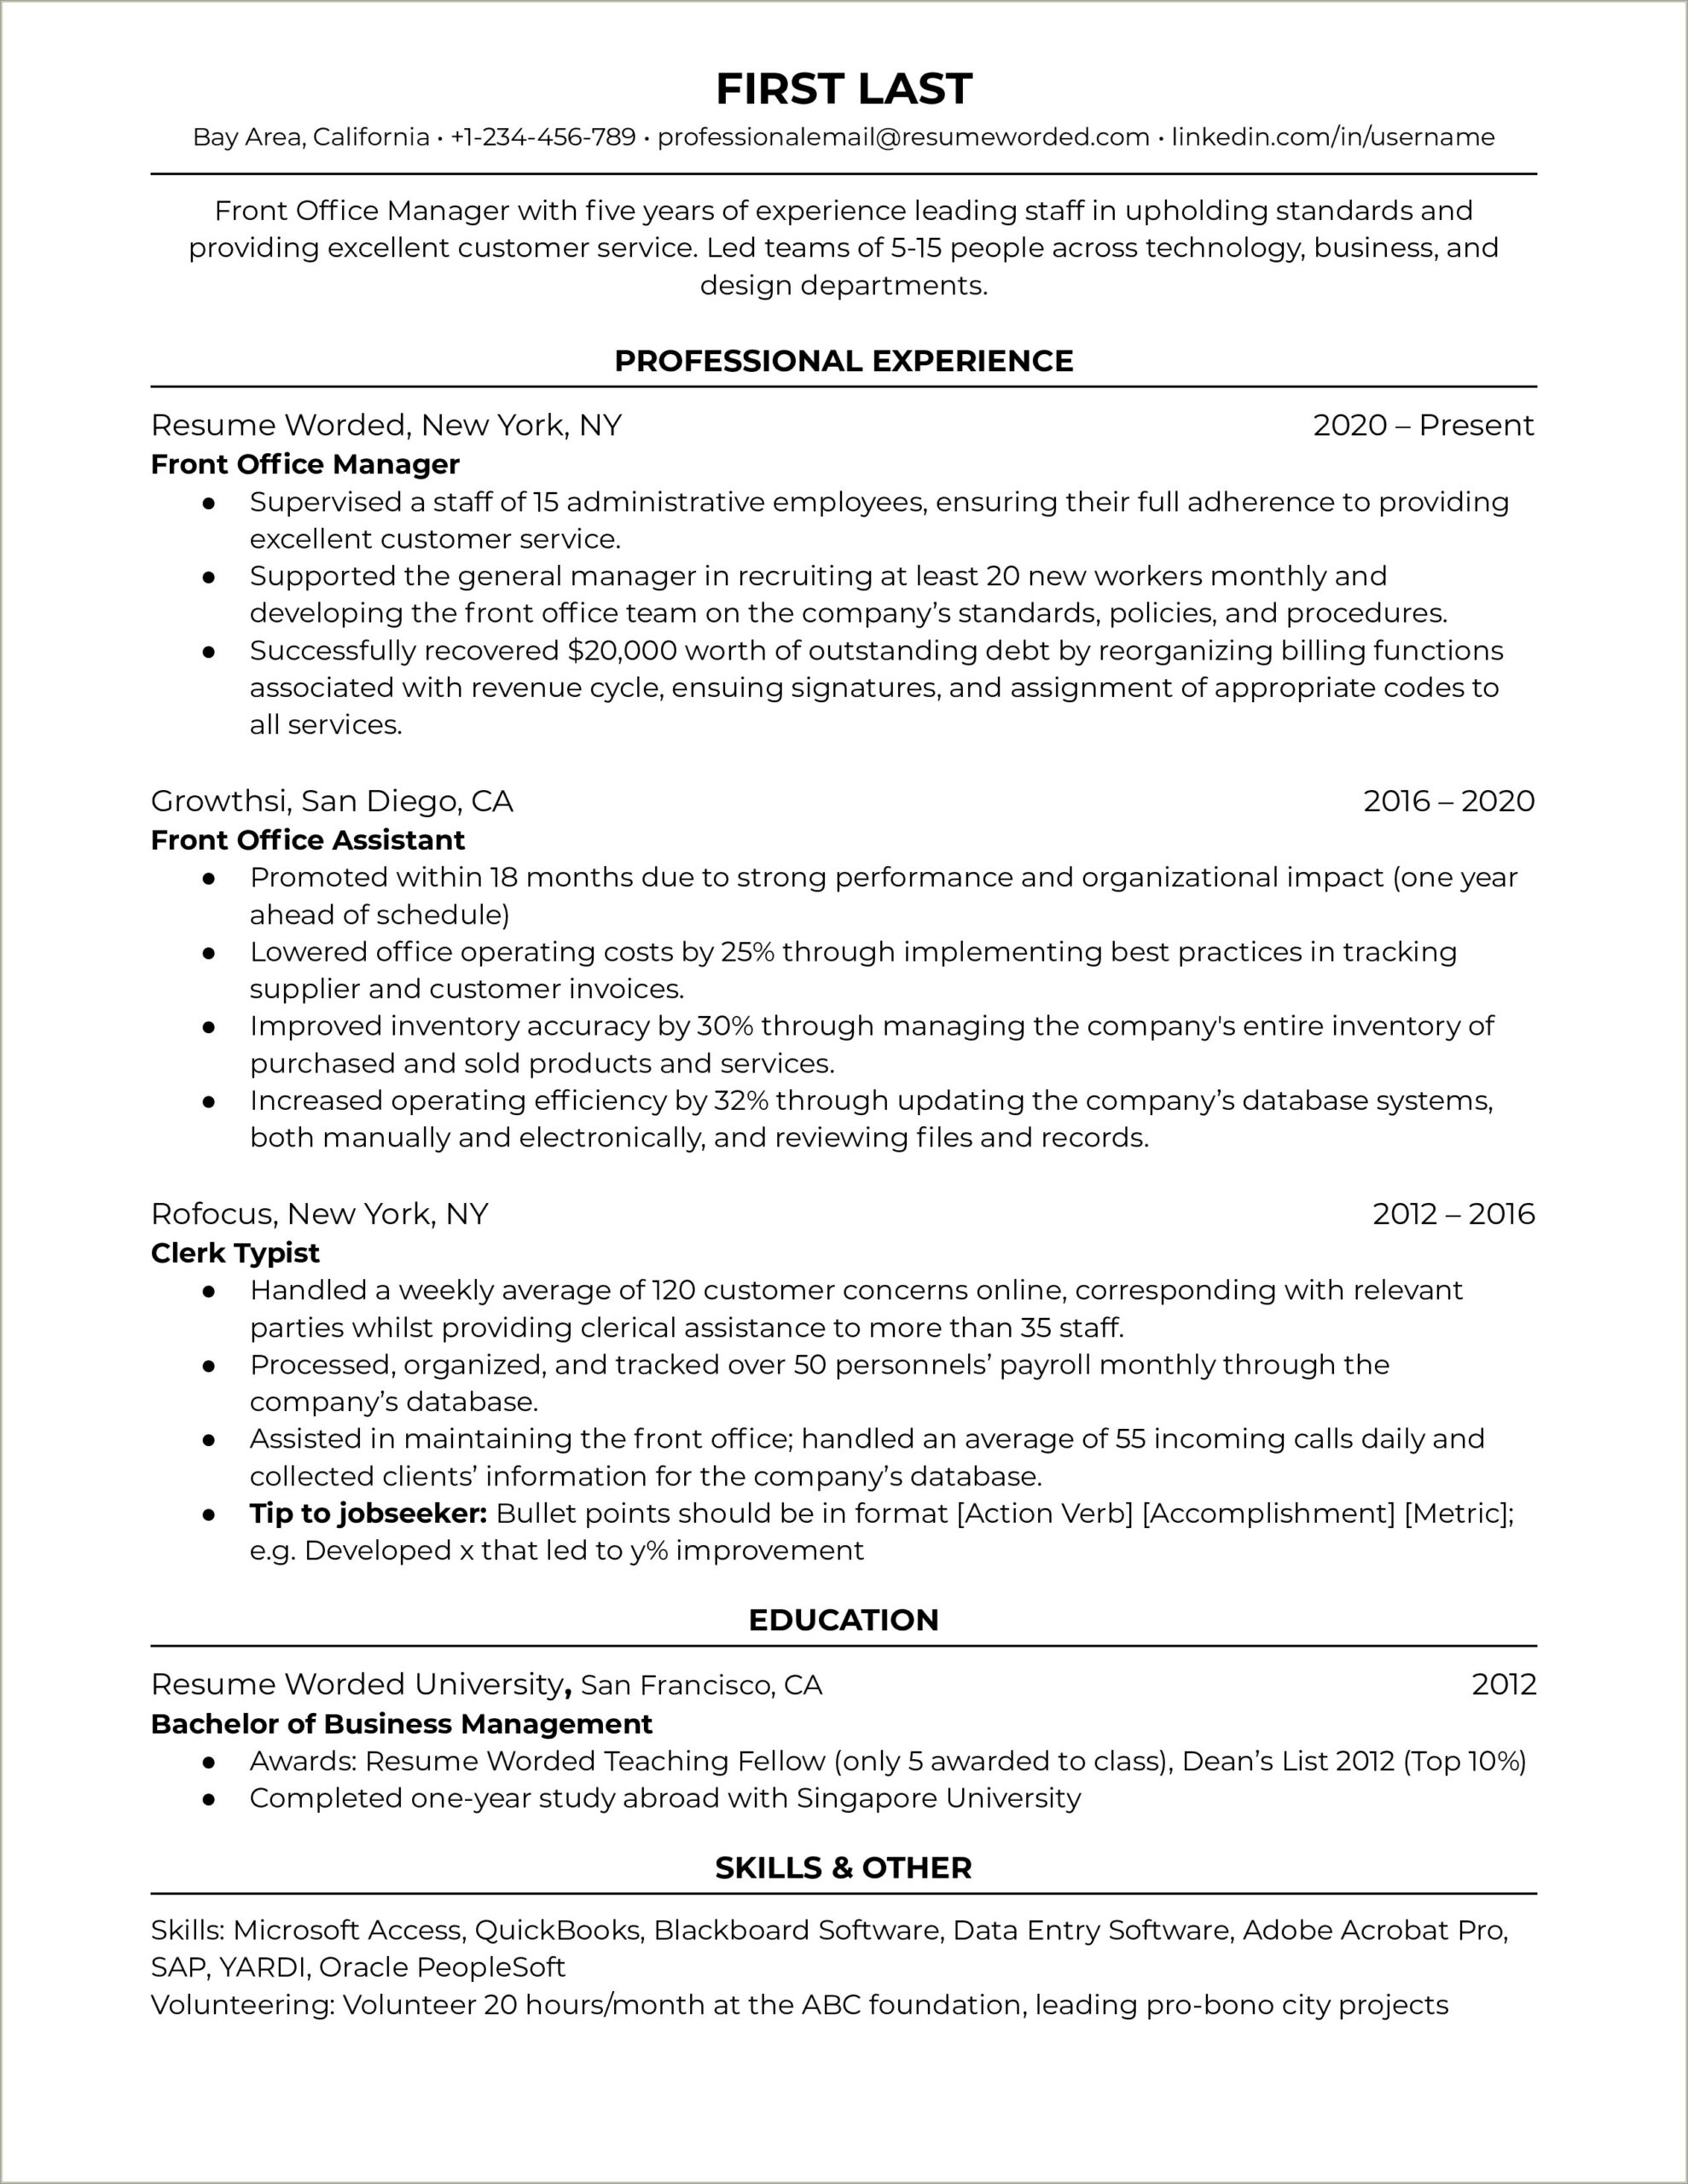 Home Health Care Office Manager Resume